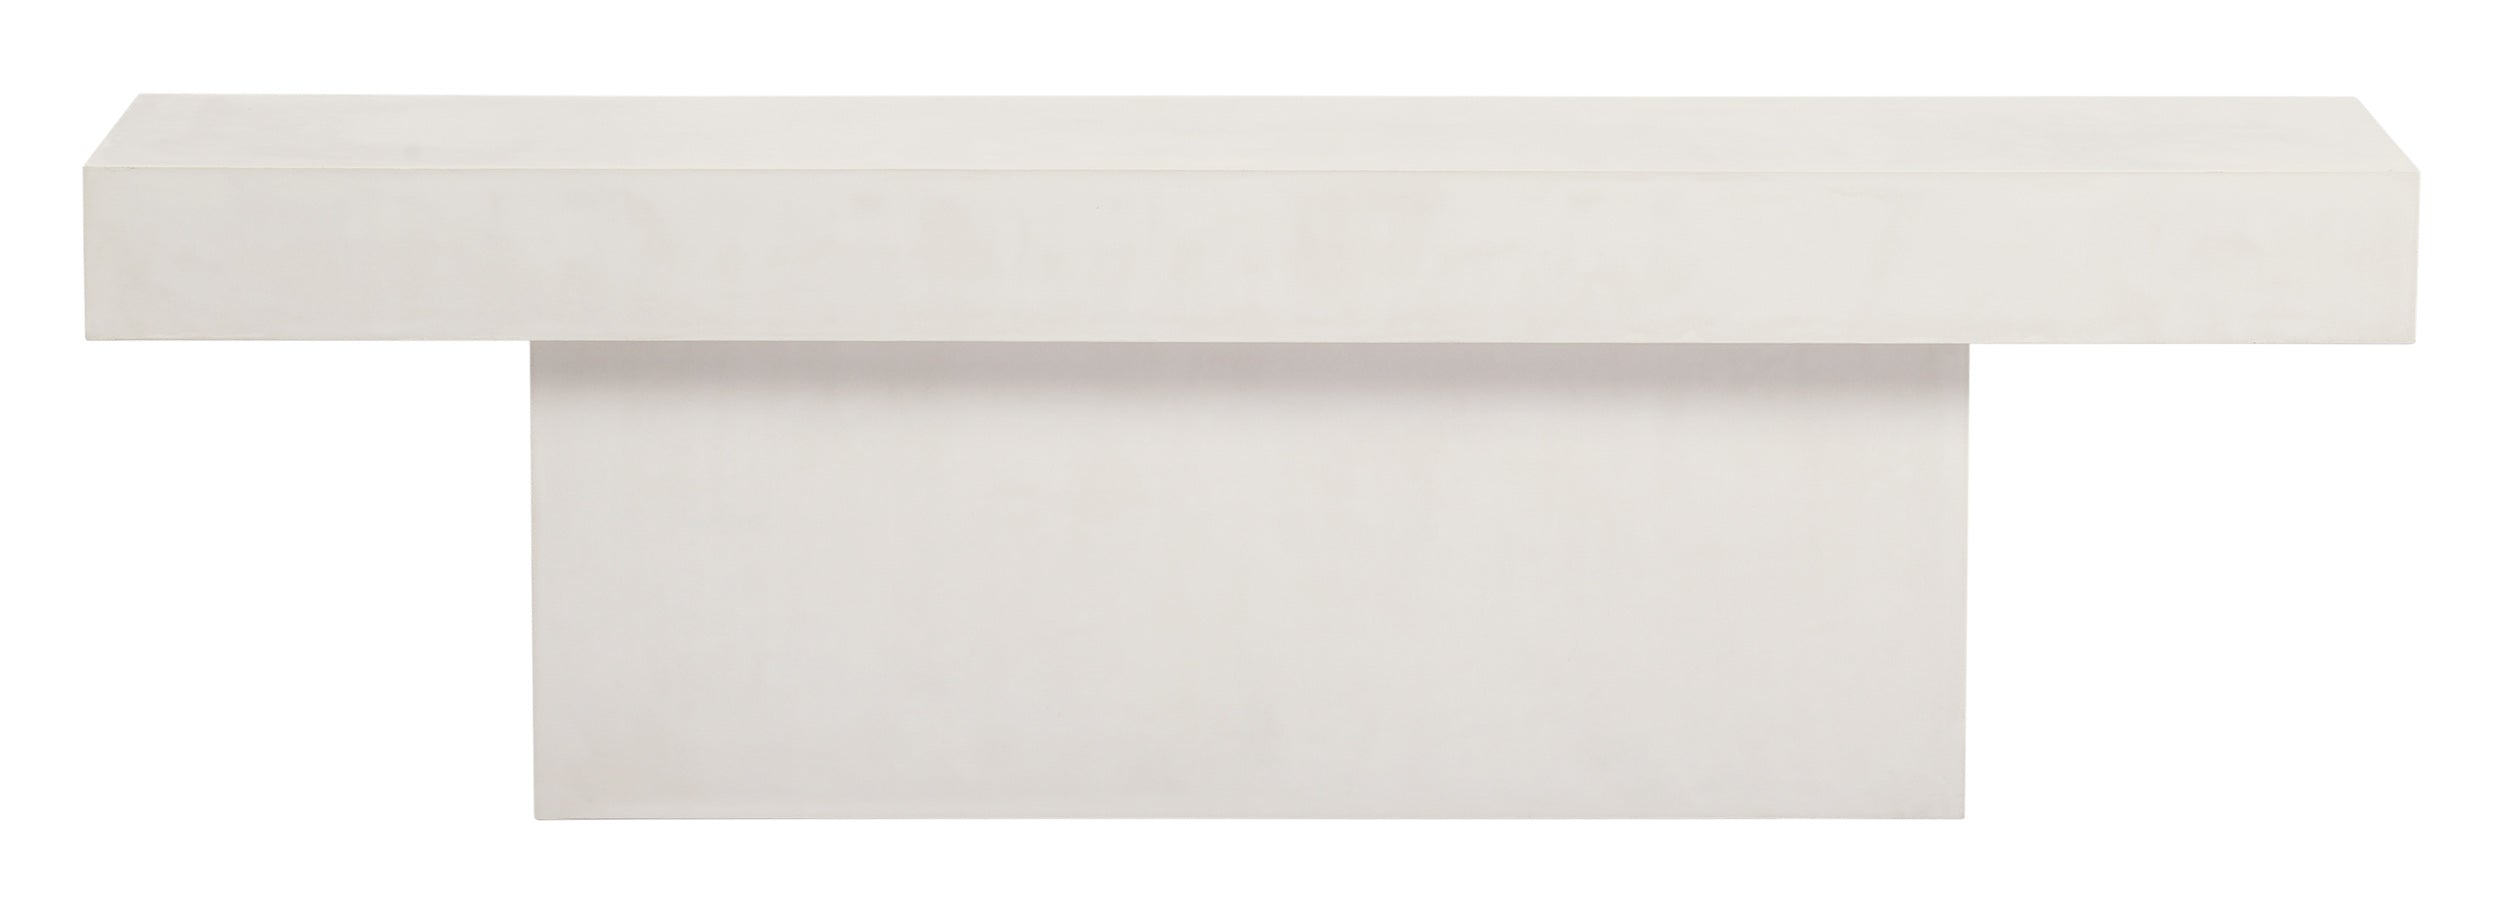 Perpetual T-Bench – Ivory White Outdoor Bench